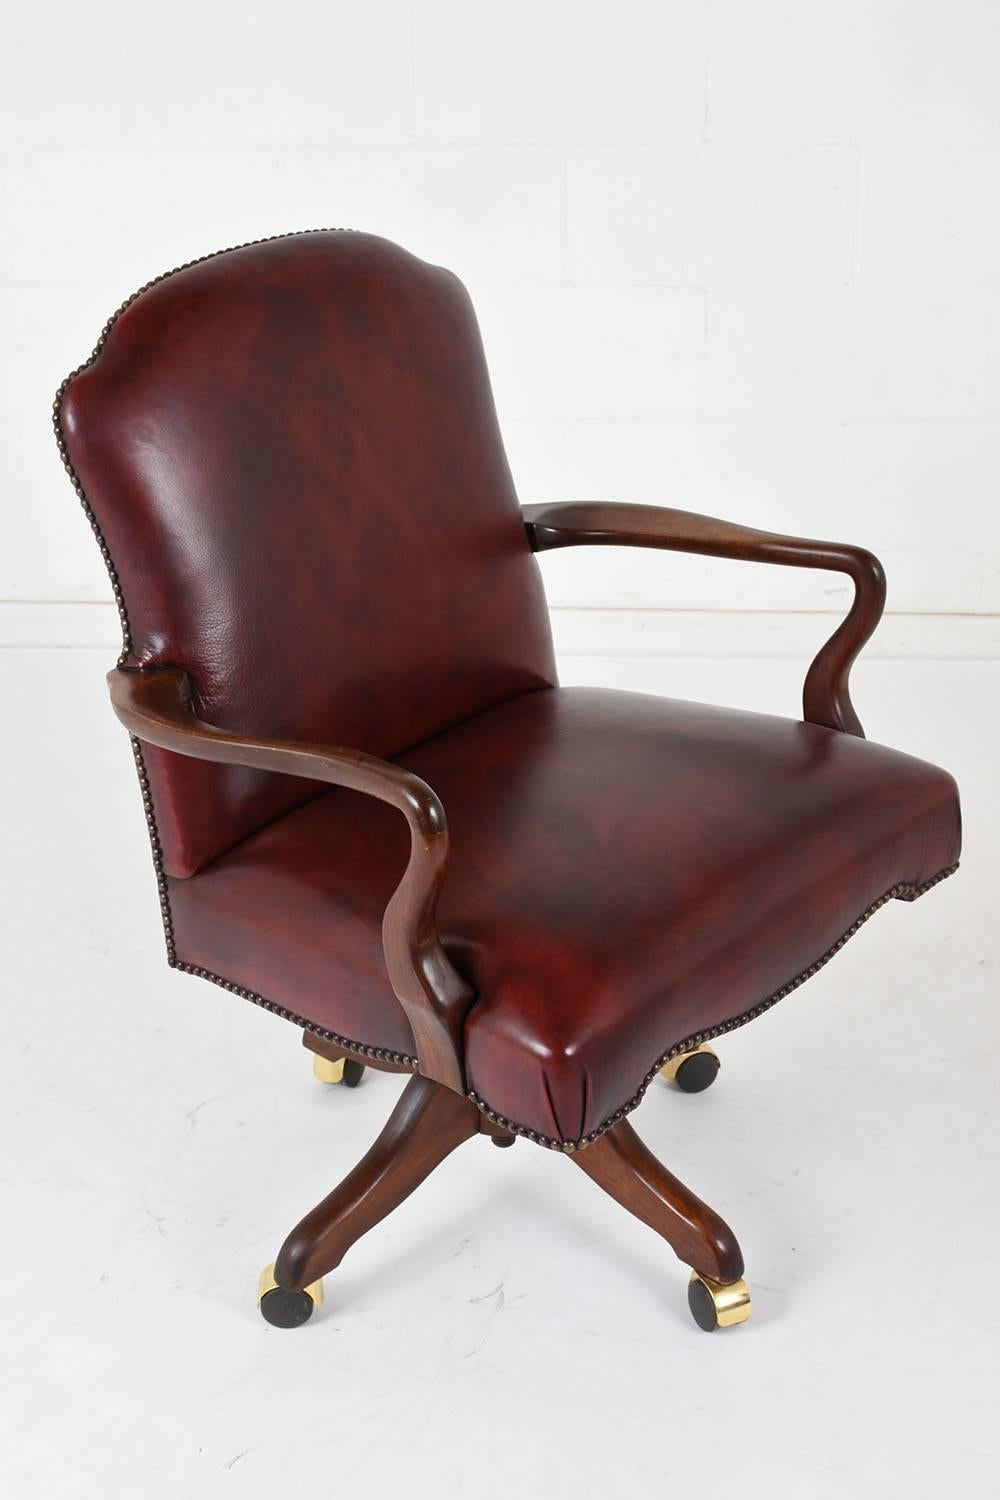 This Regency-Style Swivel Office Chair is upholstered in a burgundy color leather that is accented by brass nailhead trim along the edges. The arms and base are made of mahogany wood stained in rich mahogany color, and the chair features a mechanism